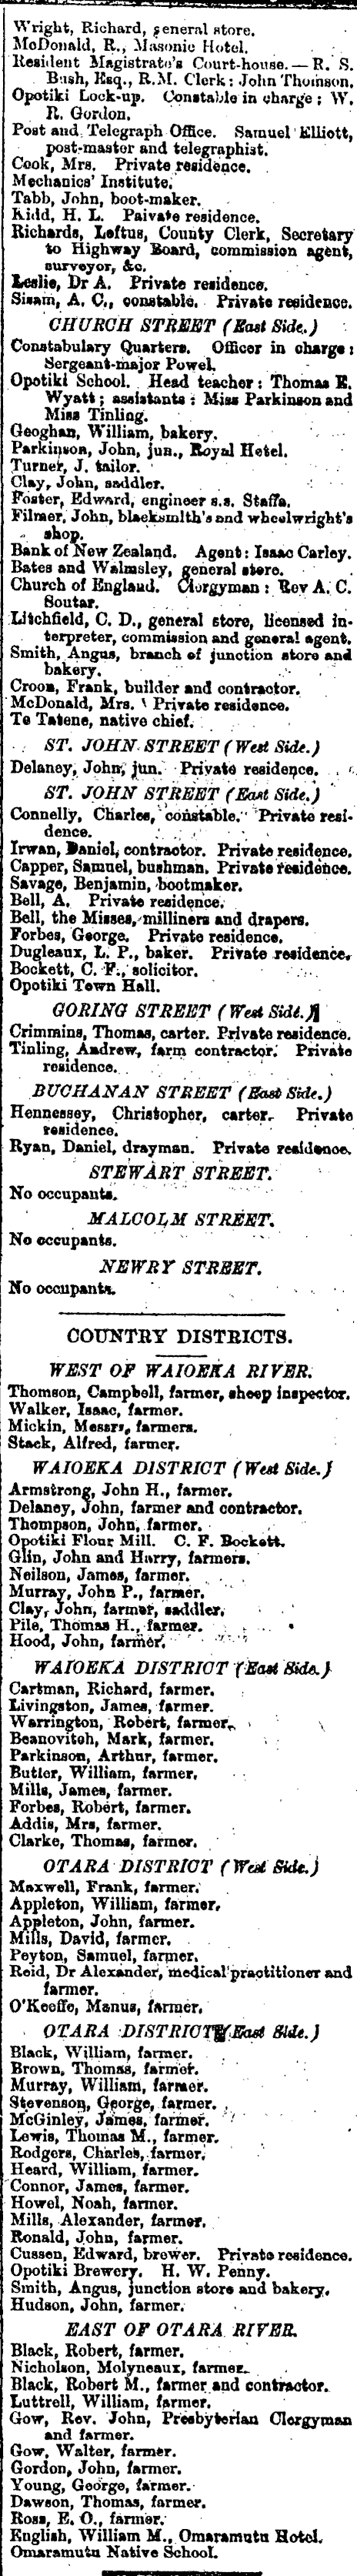 Papers Past, Newspapers, Bay of Plenty Times, 1 April 1880